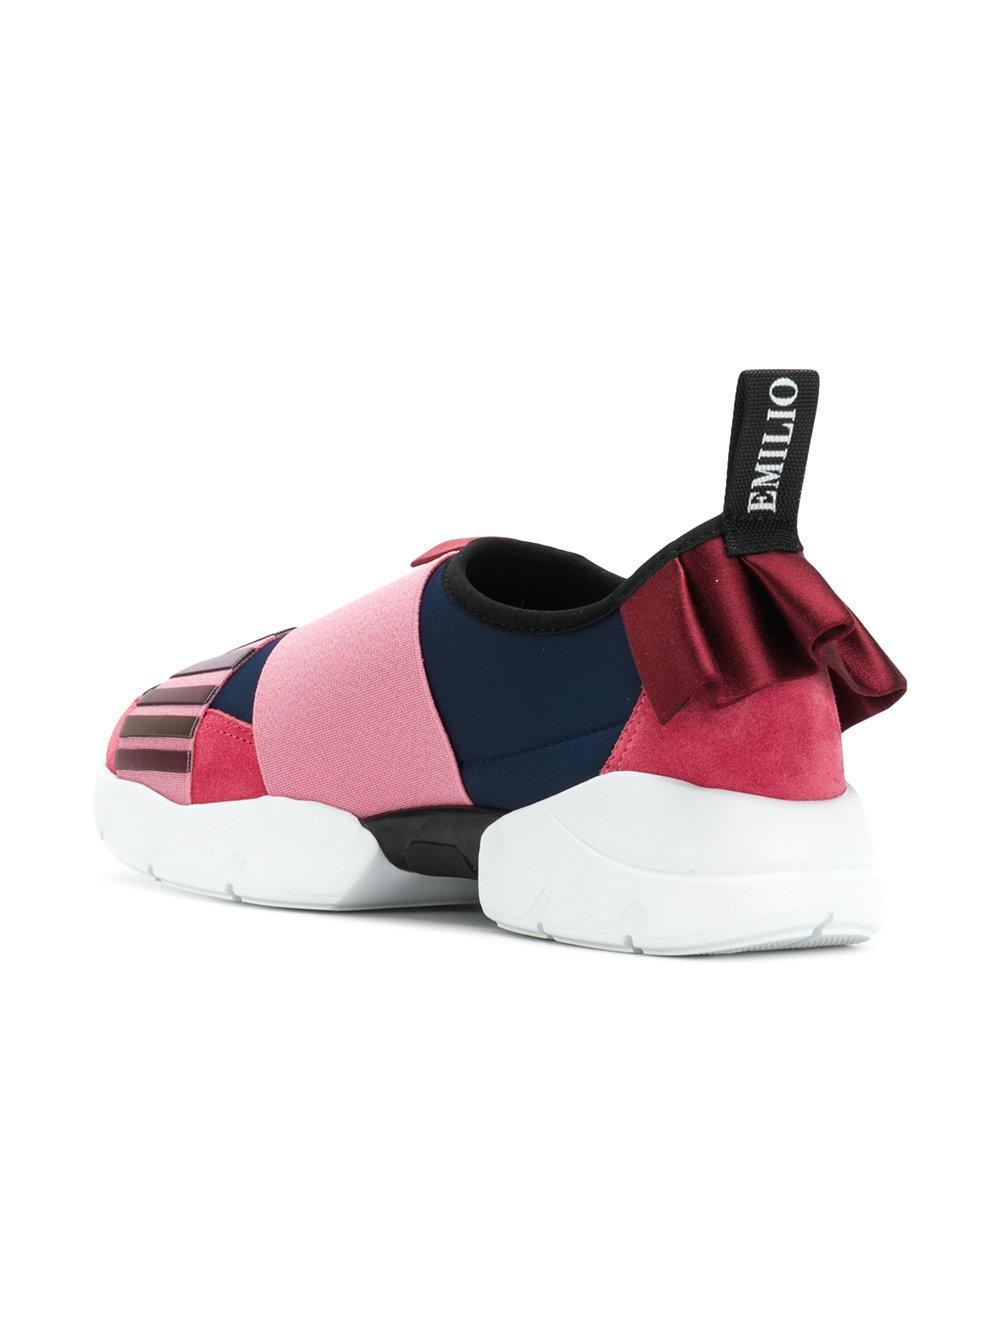 Emilio Pucci City Up Ruffle Trainers Slip On Sneakers Shoes 37